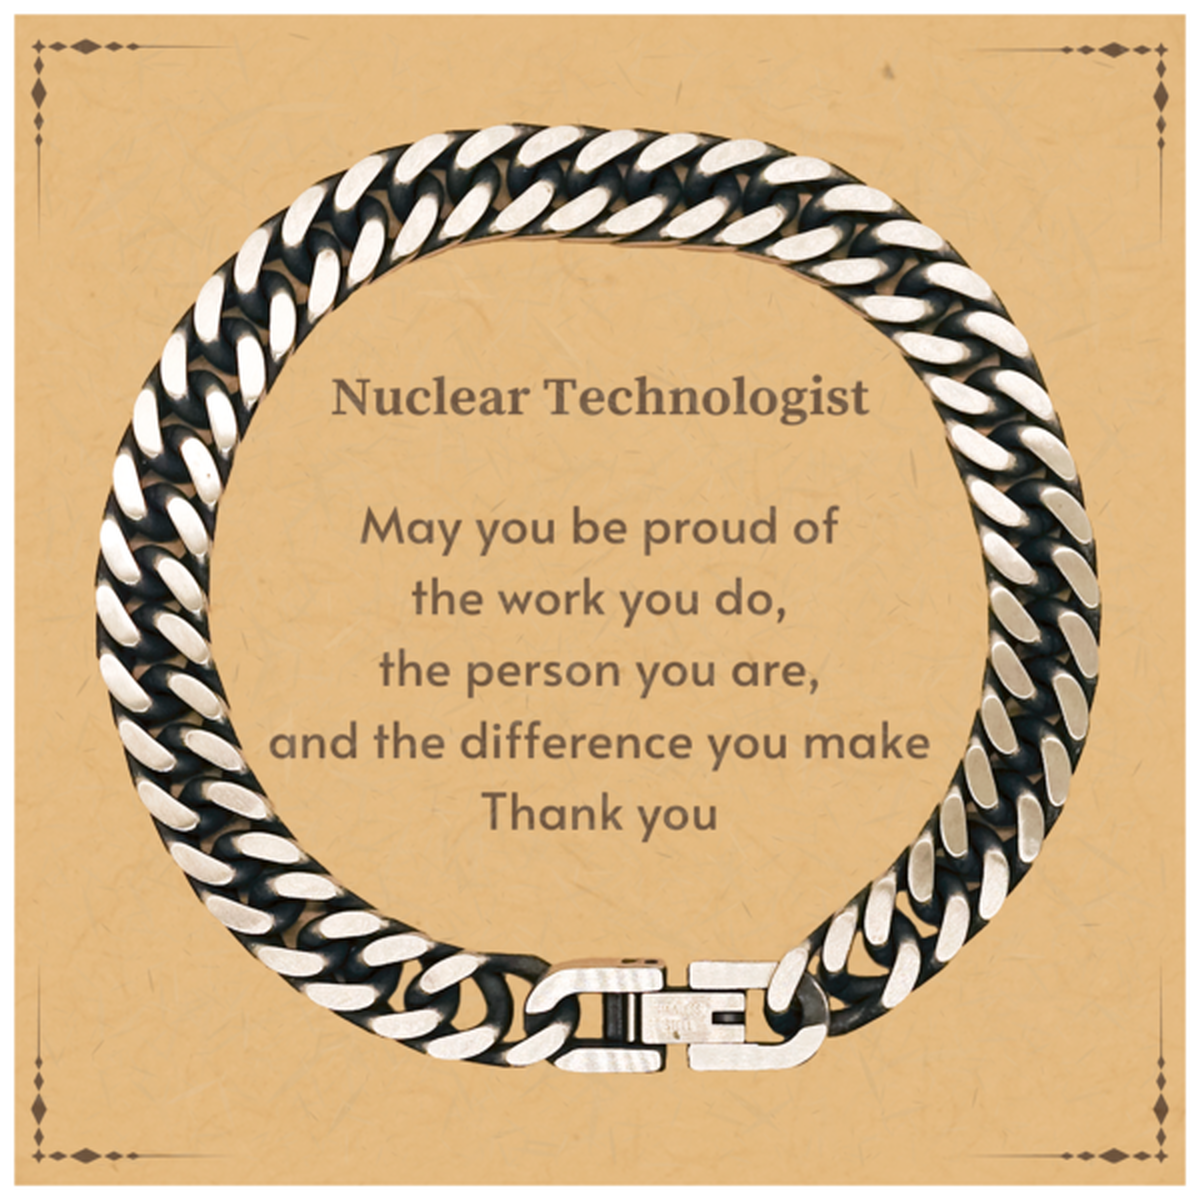 Heartwarming Cuban Link Chain Bracelet Retirement Coworkers Gifts for Nuclear Technologist, Nuclear Technologist May You be proud of the work you do, the person you are Gifts for Boss Men Women Friends